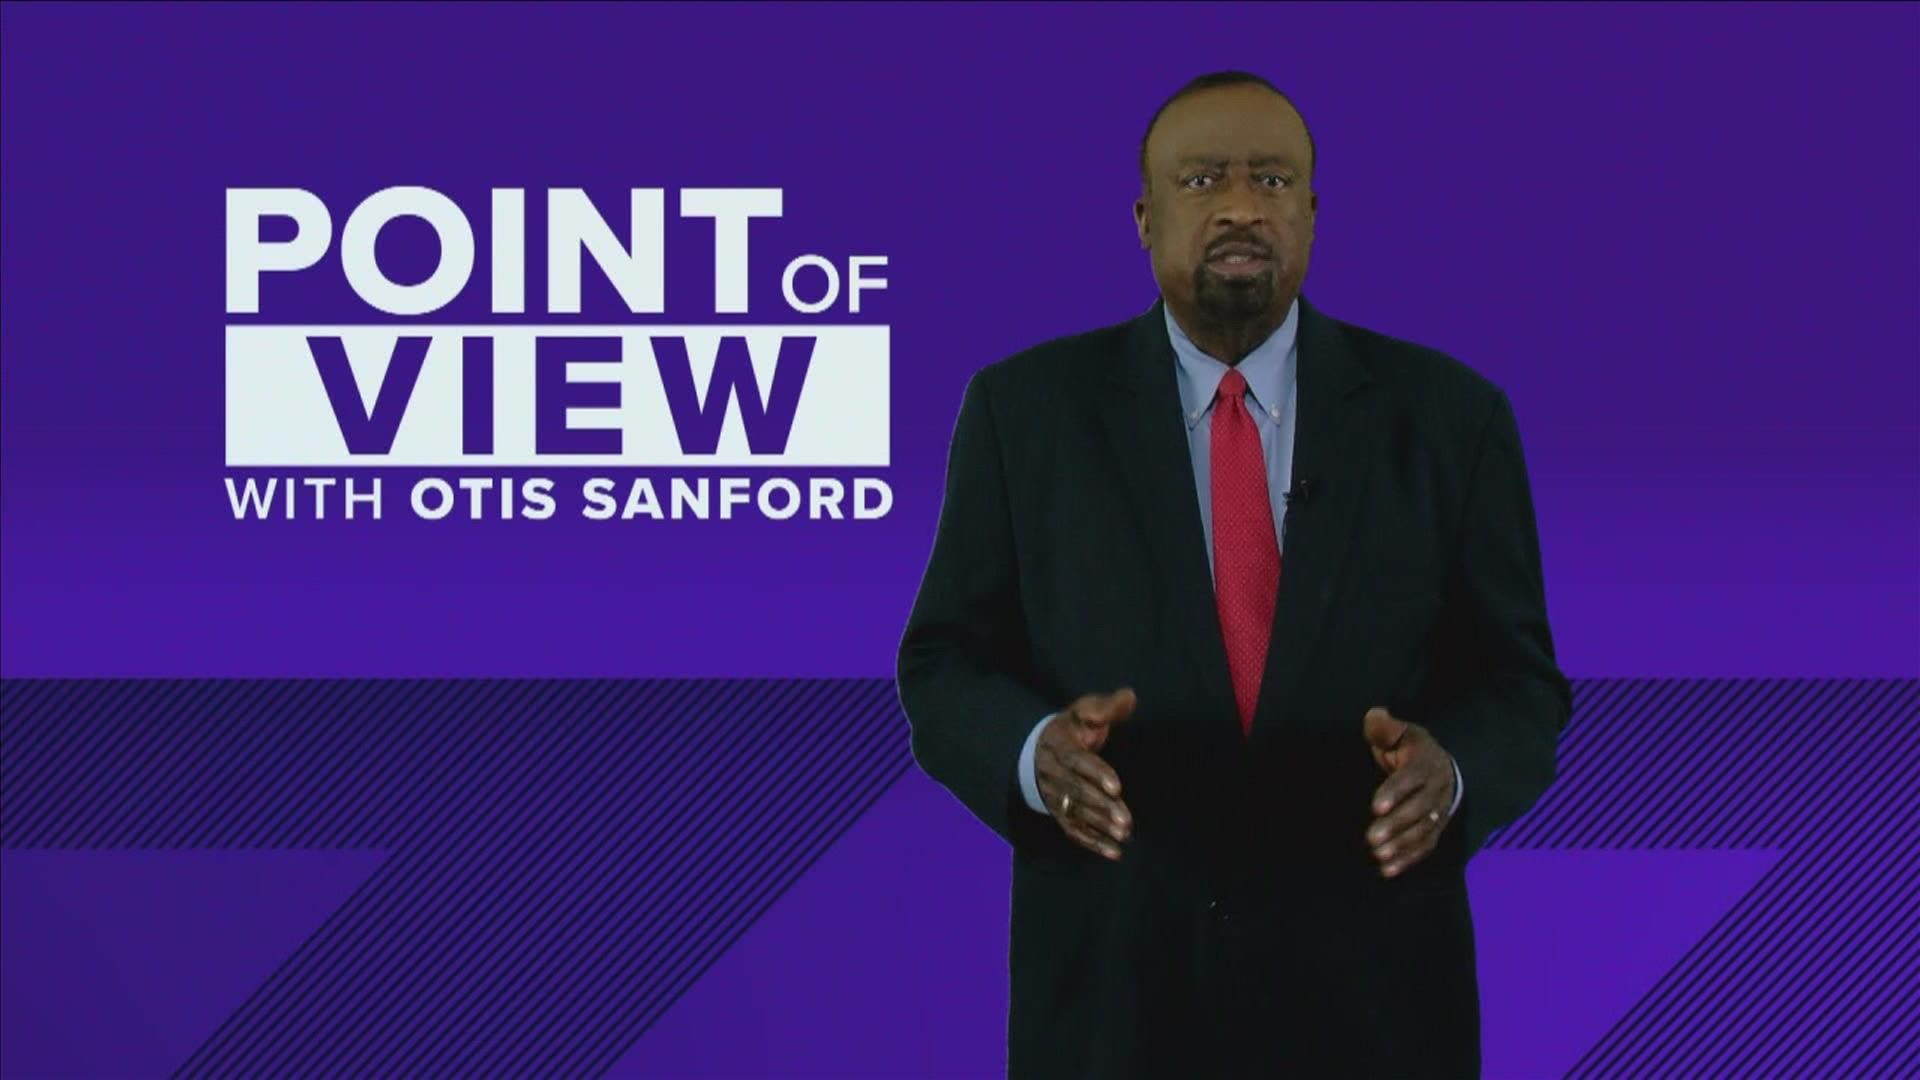 ABC24 political analyst and commentator Otis Sanford shared his point of view on gun culture and the panic it can create.